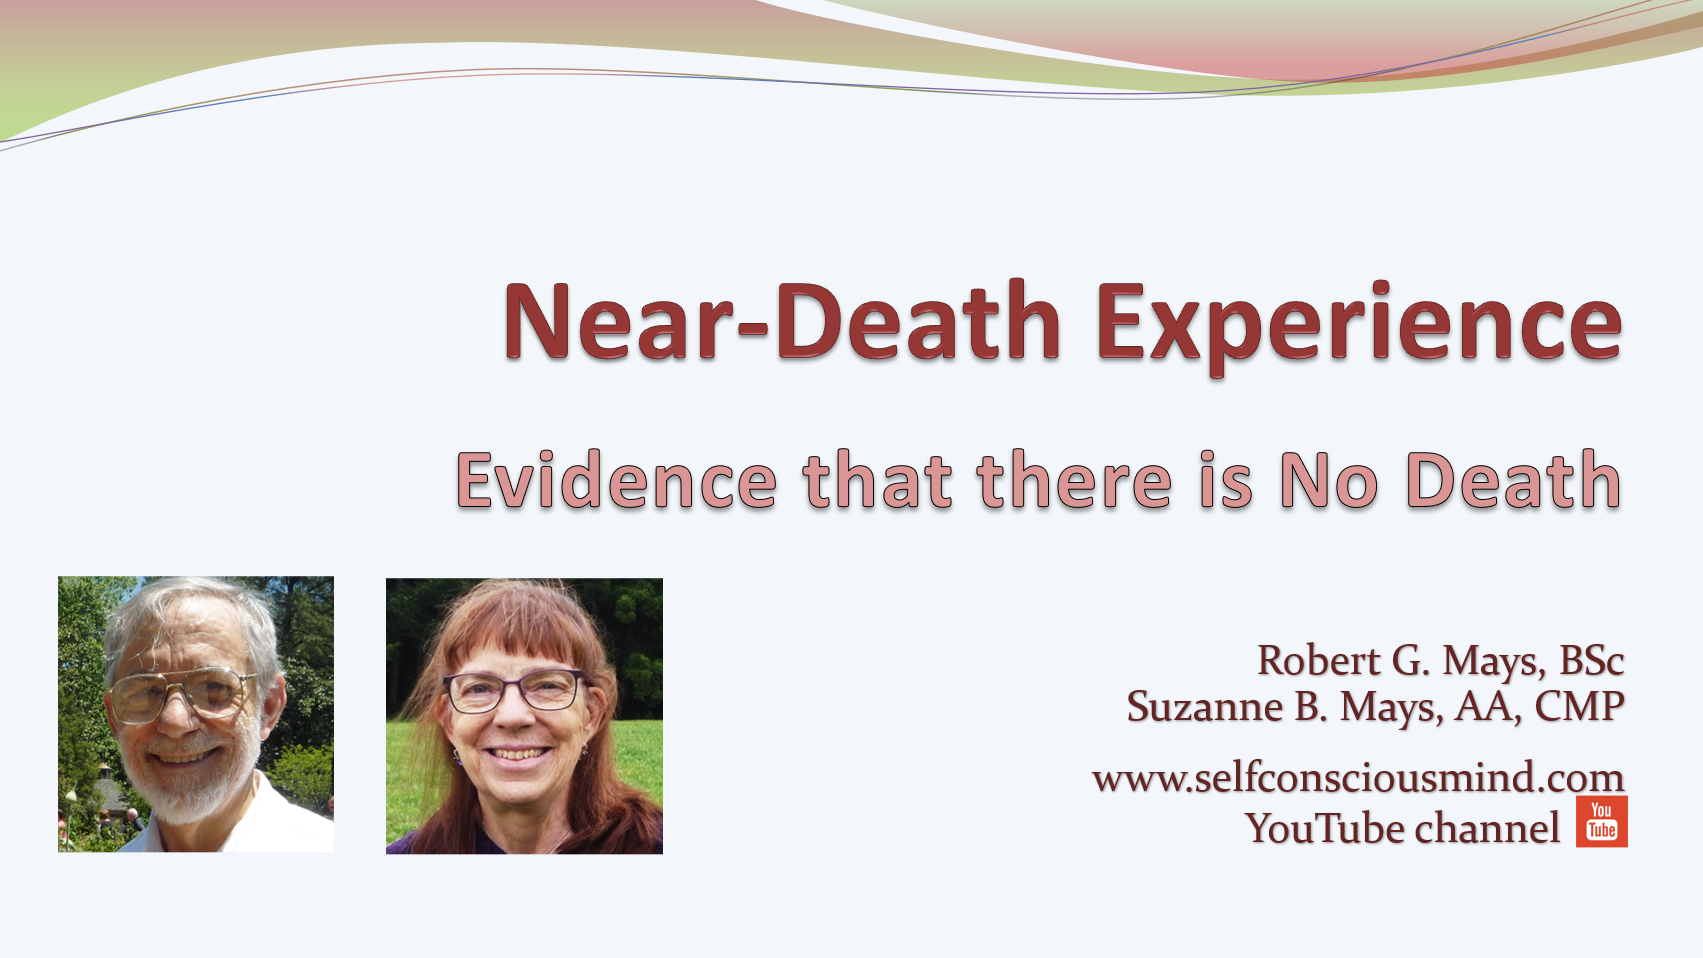 NDE Evidence There is No Death